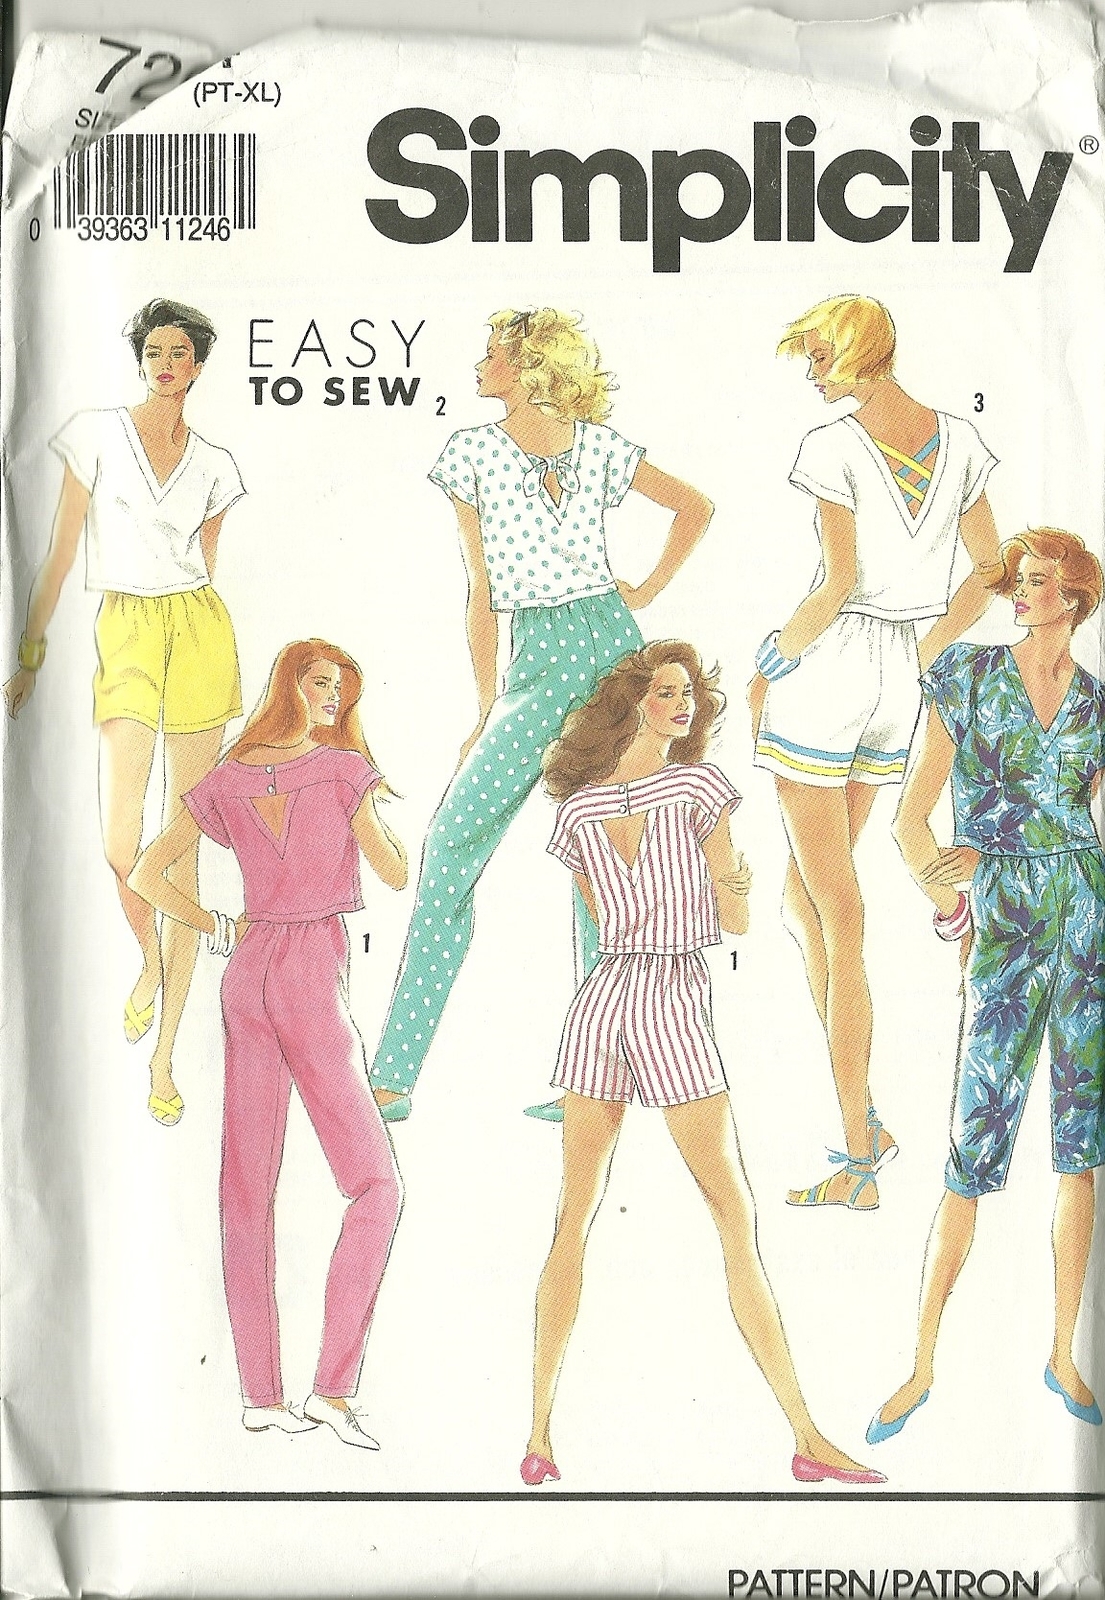 Simplicity Sewing Pattern 7264 Misses Womens Top Pants Capris Shorts 6 - 24 New - $9.99